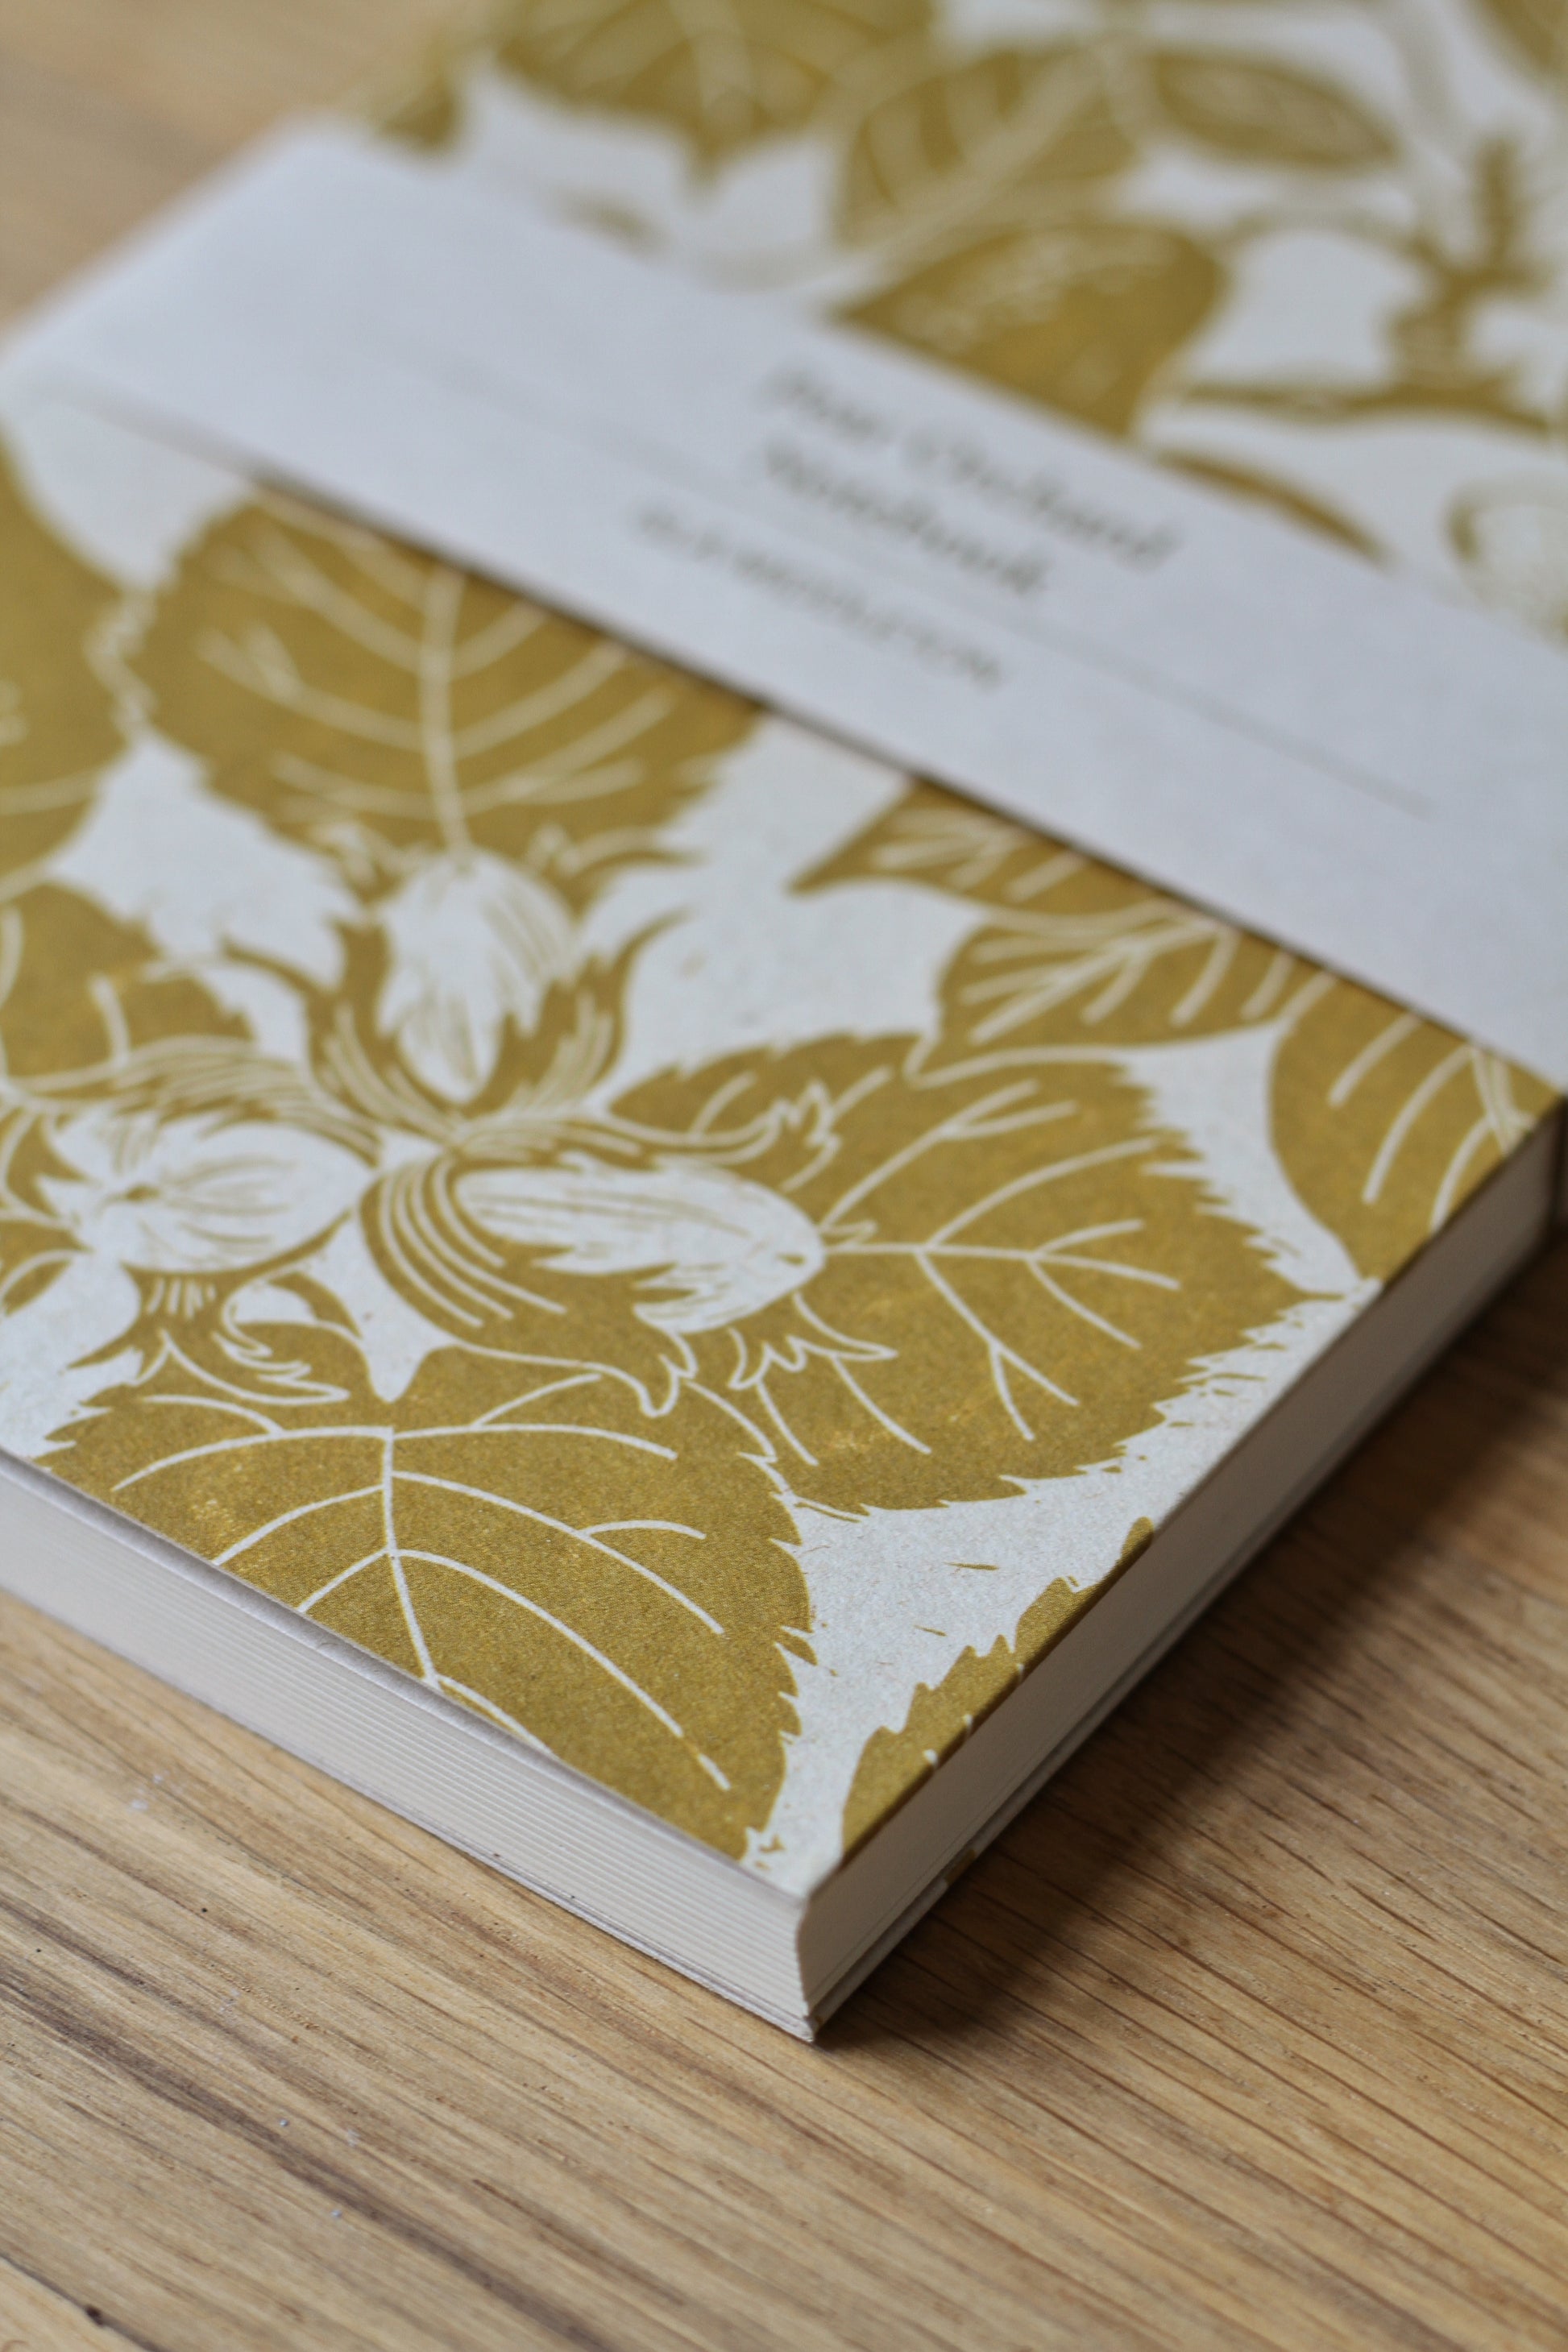 isla middleton notebook qrinted from an original lino print of pears colour is ochre 